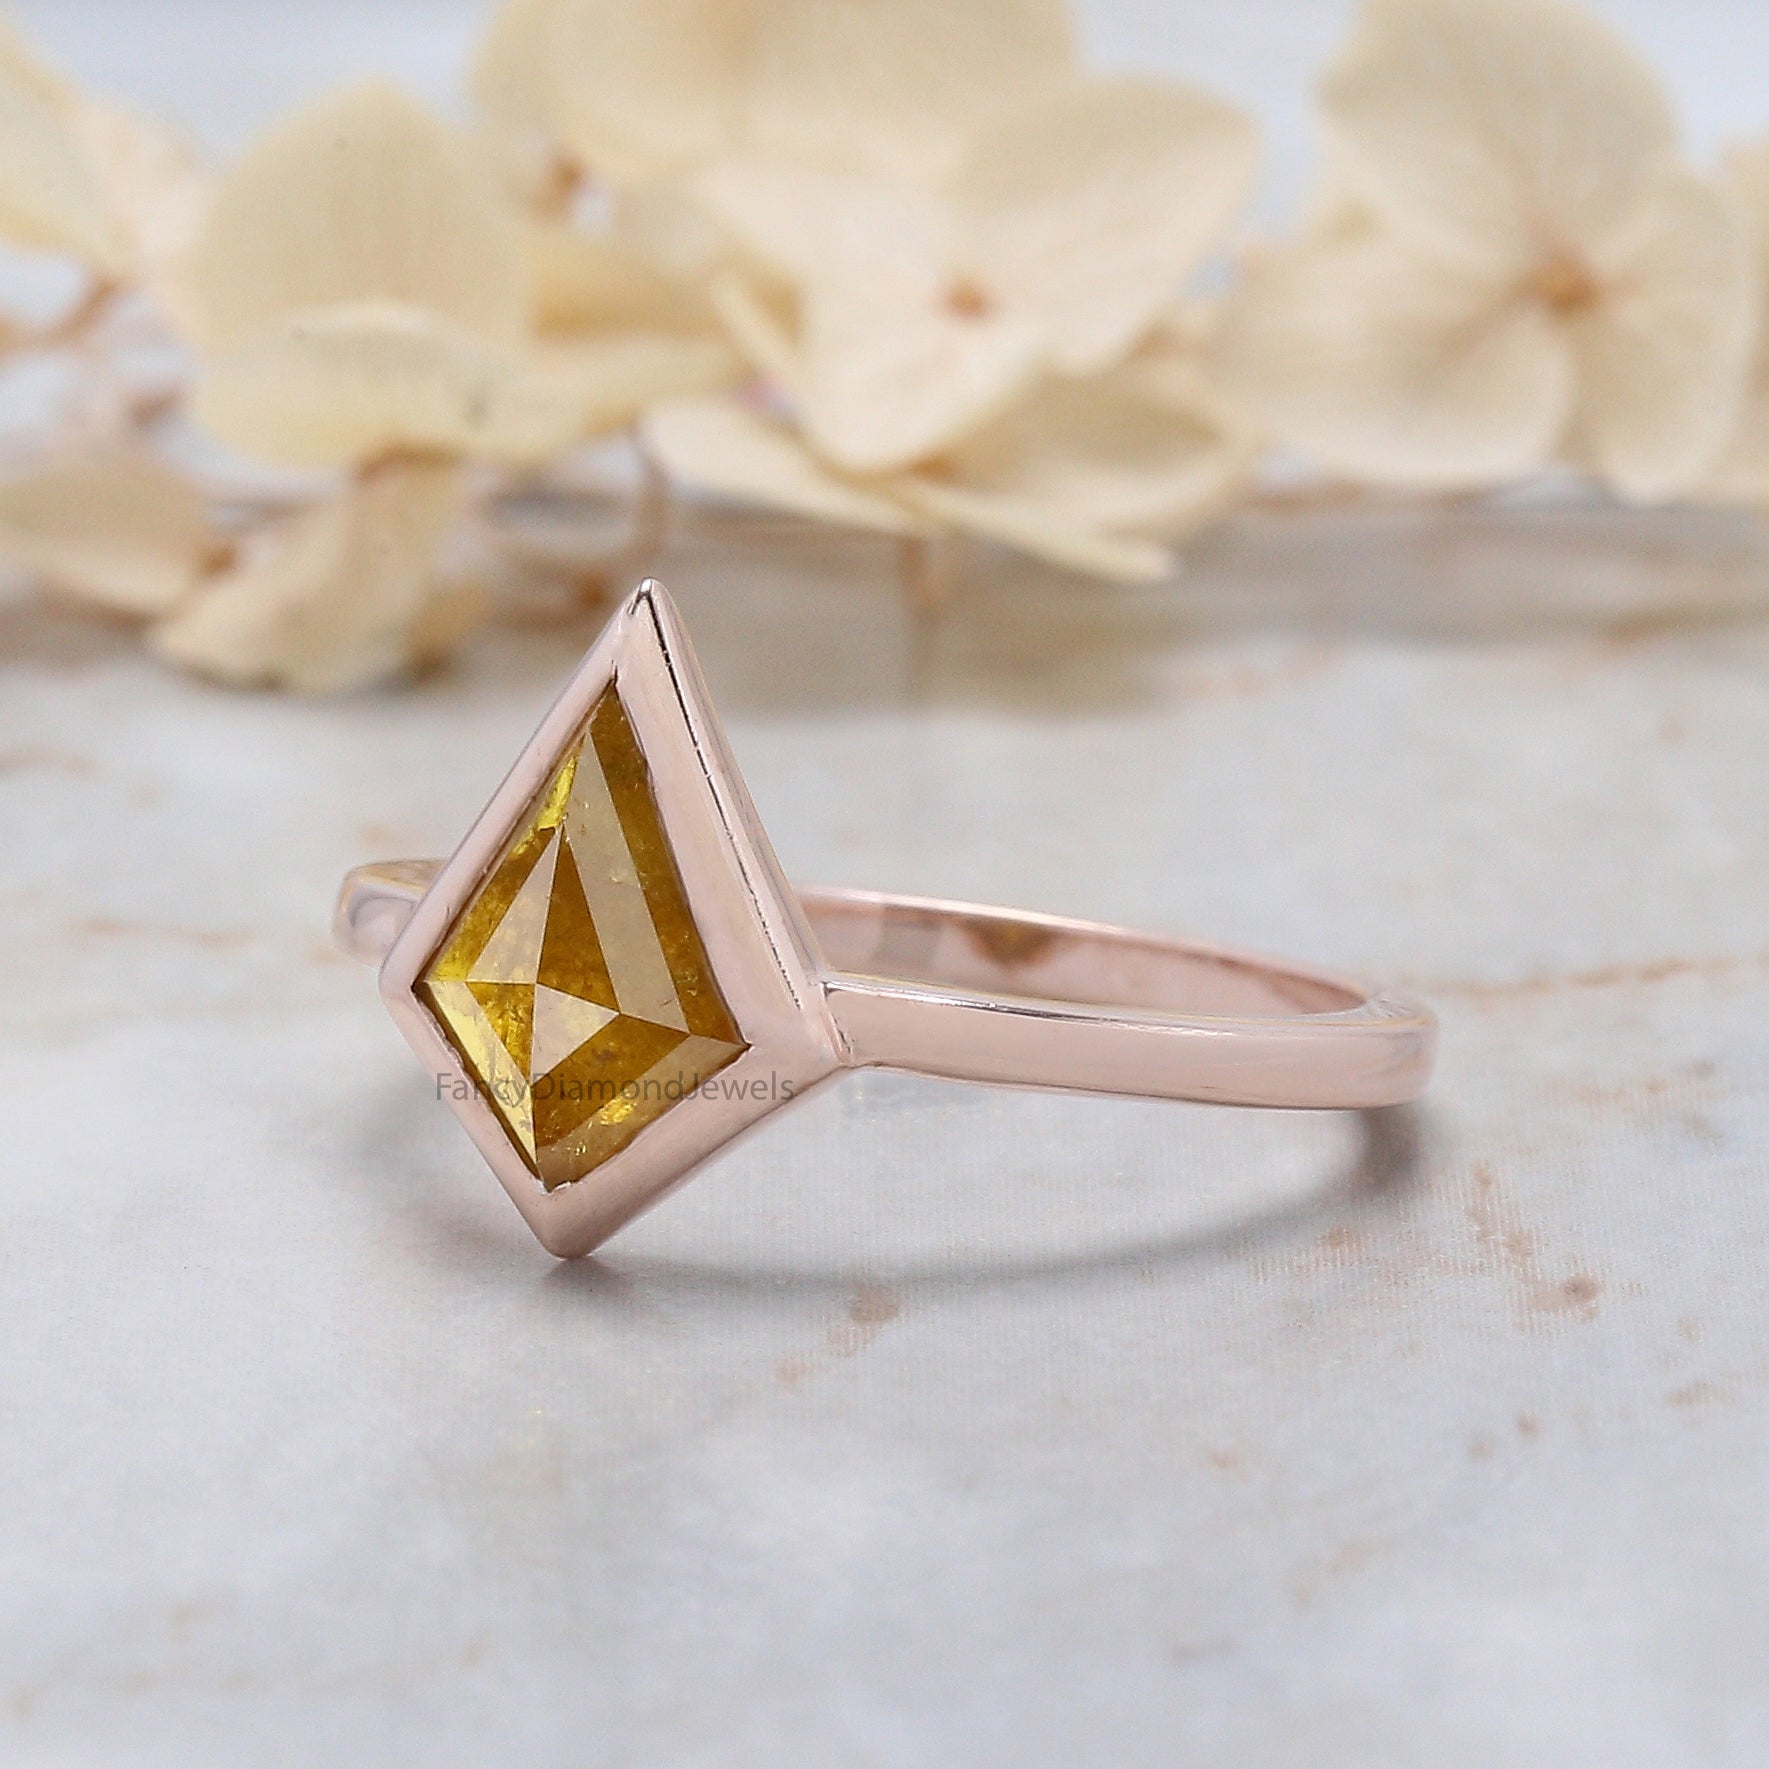 Kite Shape Yellow Color Diamond Ring 1.48 Ct 9.95 MM Kite Cut Diamond Ring 14K Solid Rose Gold Silver Engagement Ring Gift For Her QN660